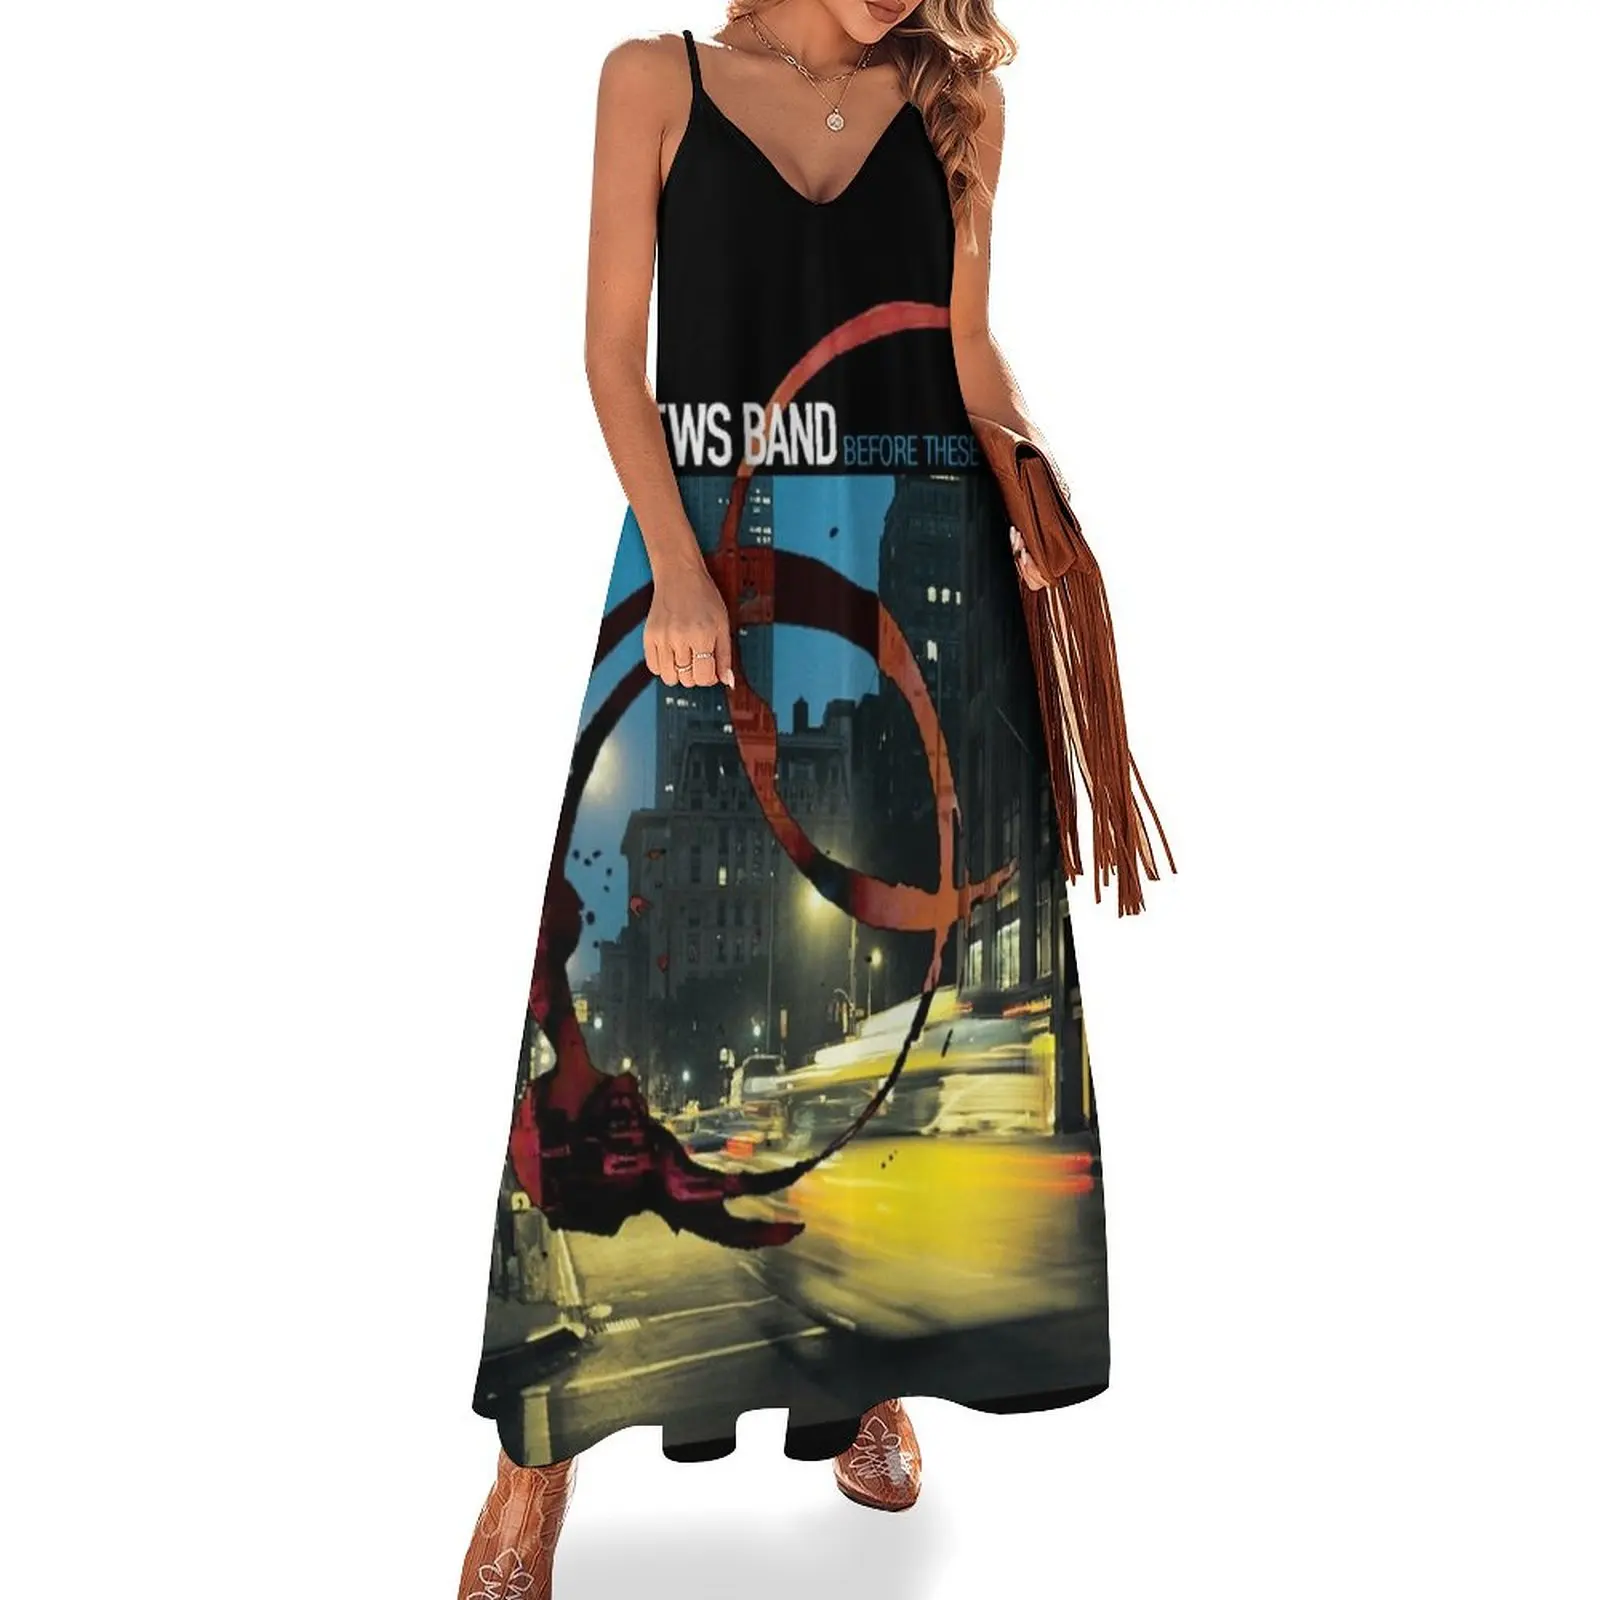 

Dave Matthews Band before these crowded streets Sleeveless Dress Casual dresses dresses summer